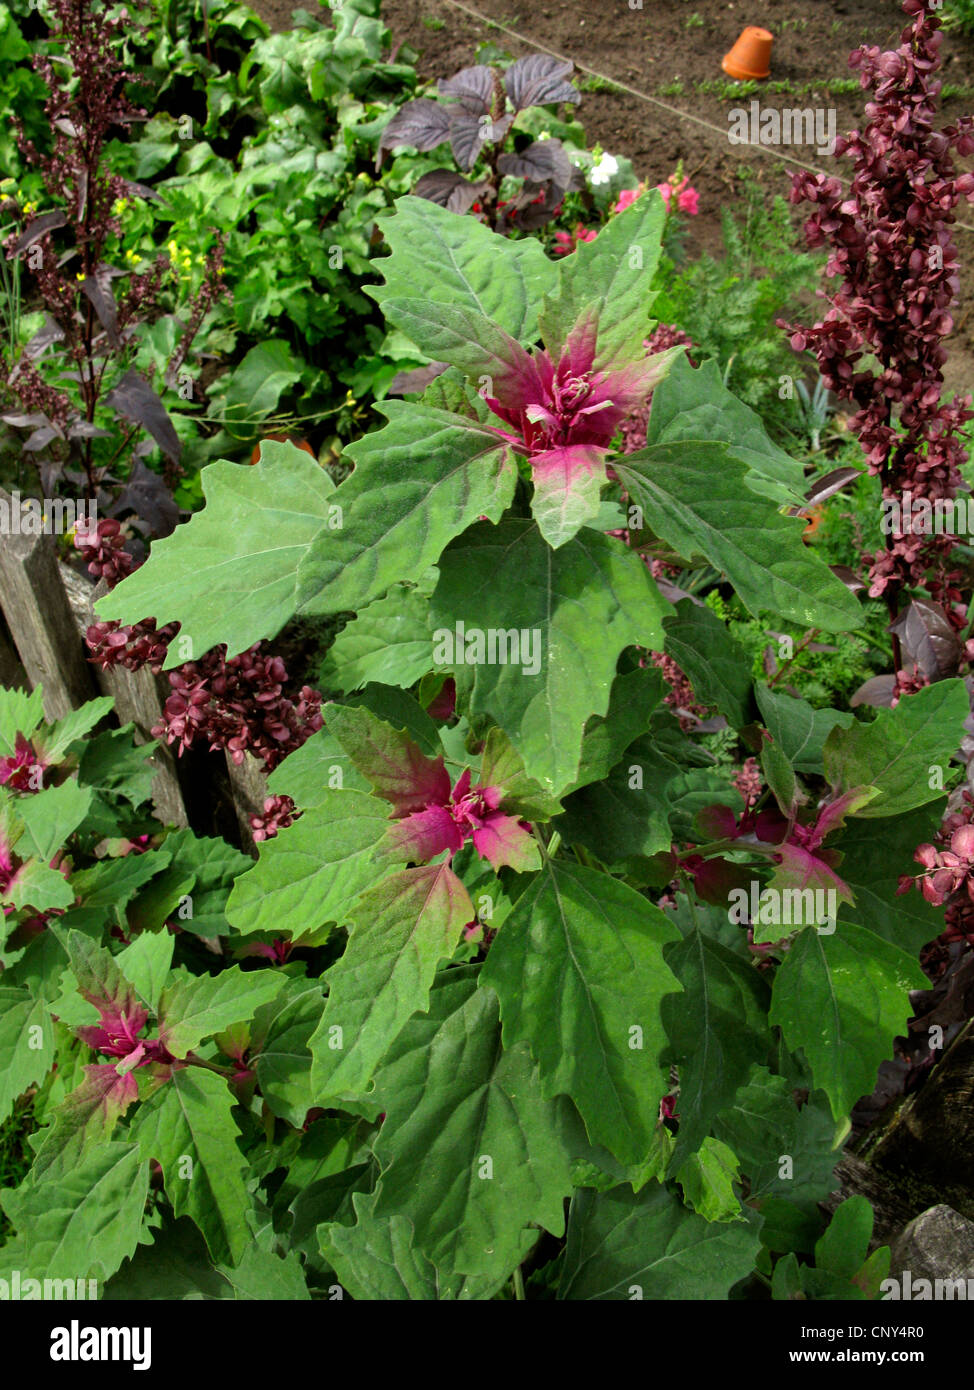 Magenta lamb's quarters, Tree Spinach (Chenopodium giganteum), at a garden fence, Germany Stock Photo